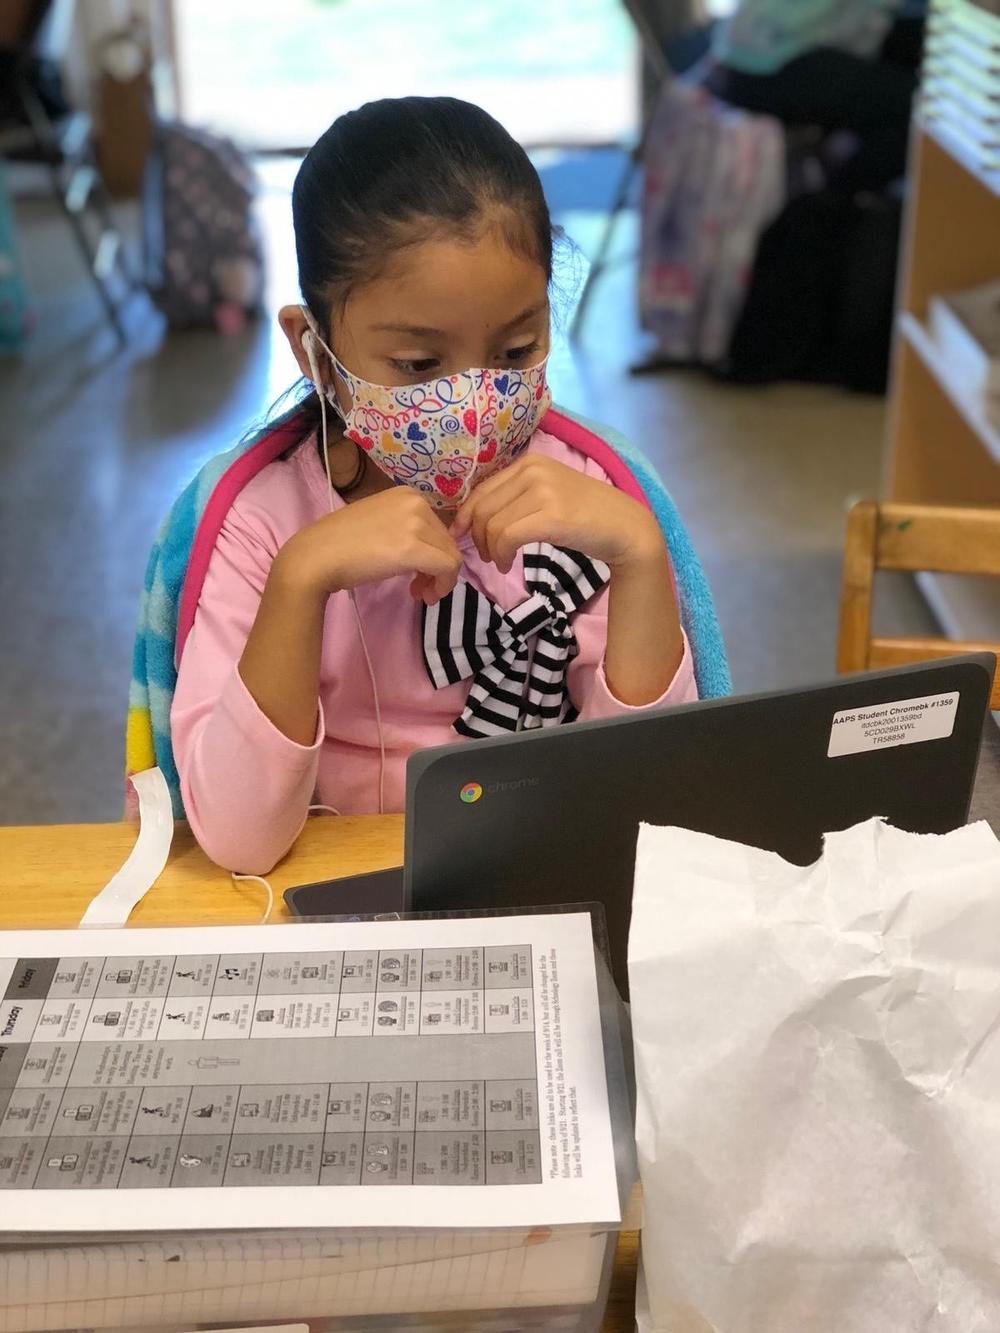 Angelique, a third grader, follows her afternoon virtual classes on an iPad at the Ann Arbor Community Learning Center, A learning hub helping the children of undocumented families attend to their virtual classes while their parents go to work.